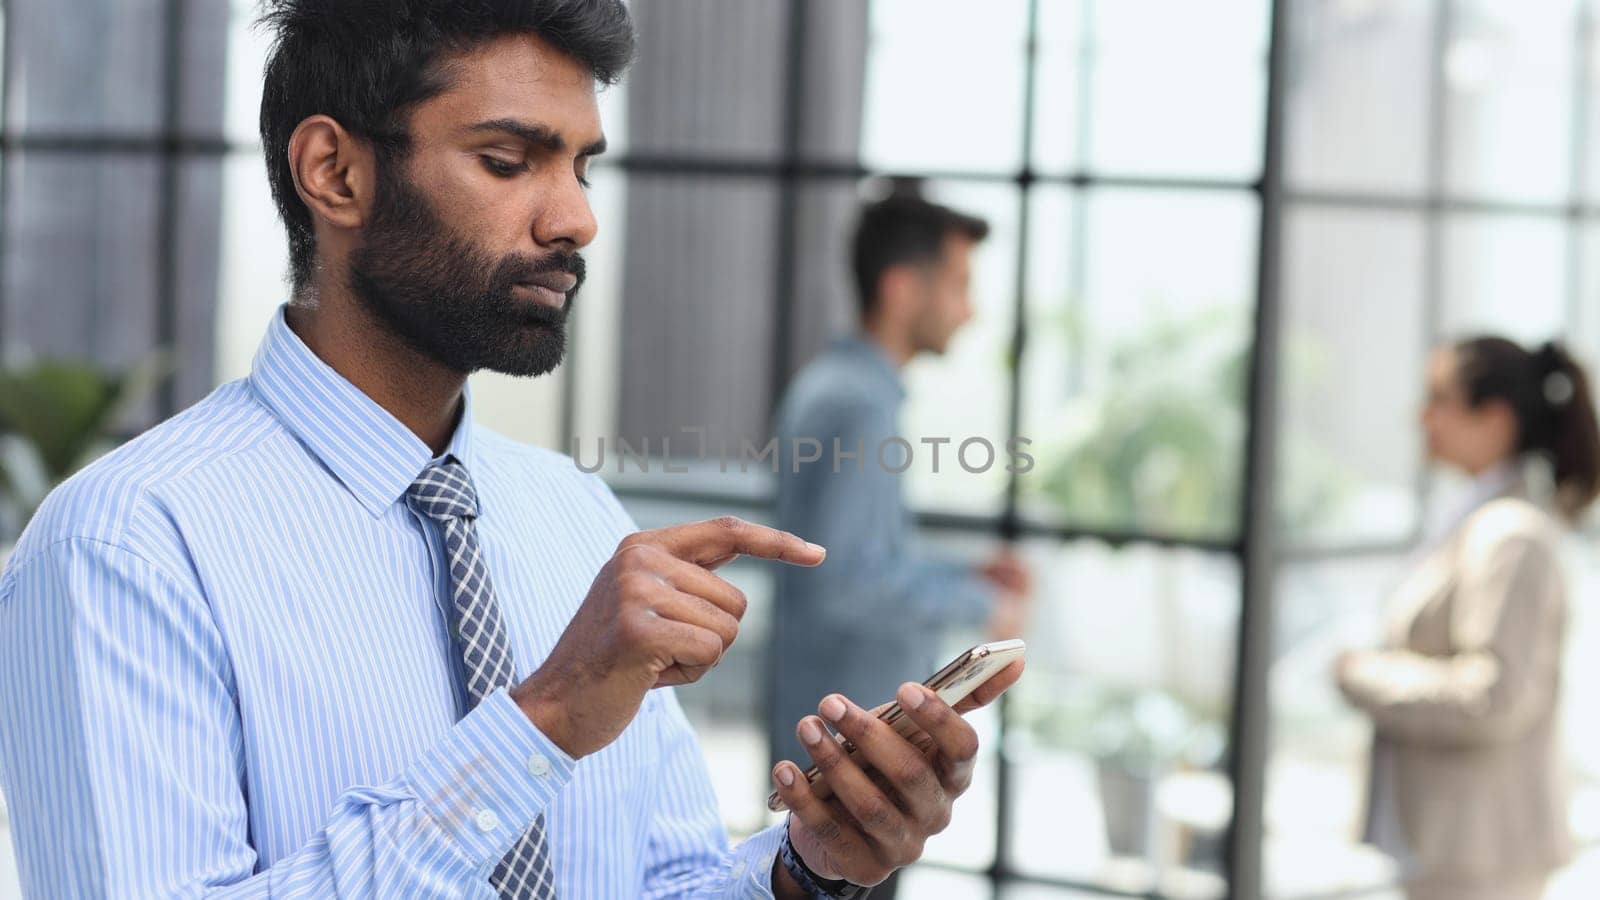 A young stands inside office, the man holds the phone in his hands, the businessman browses online pages and uses applications